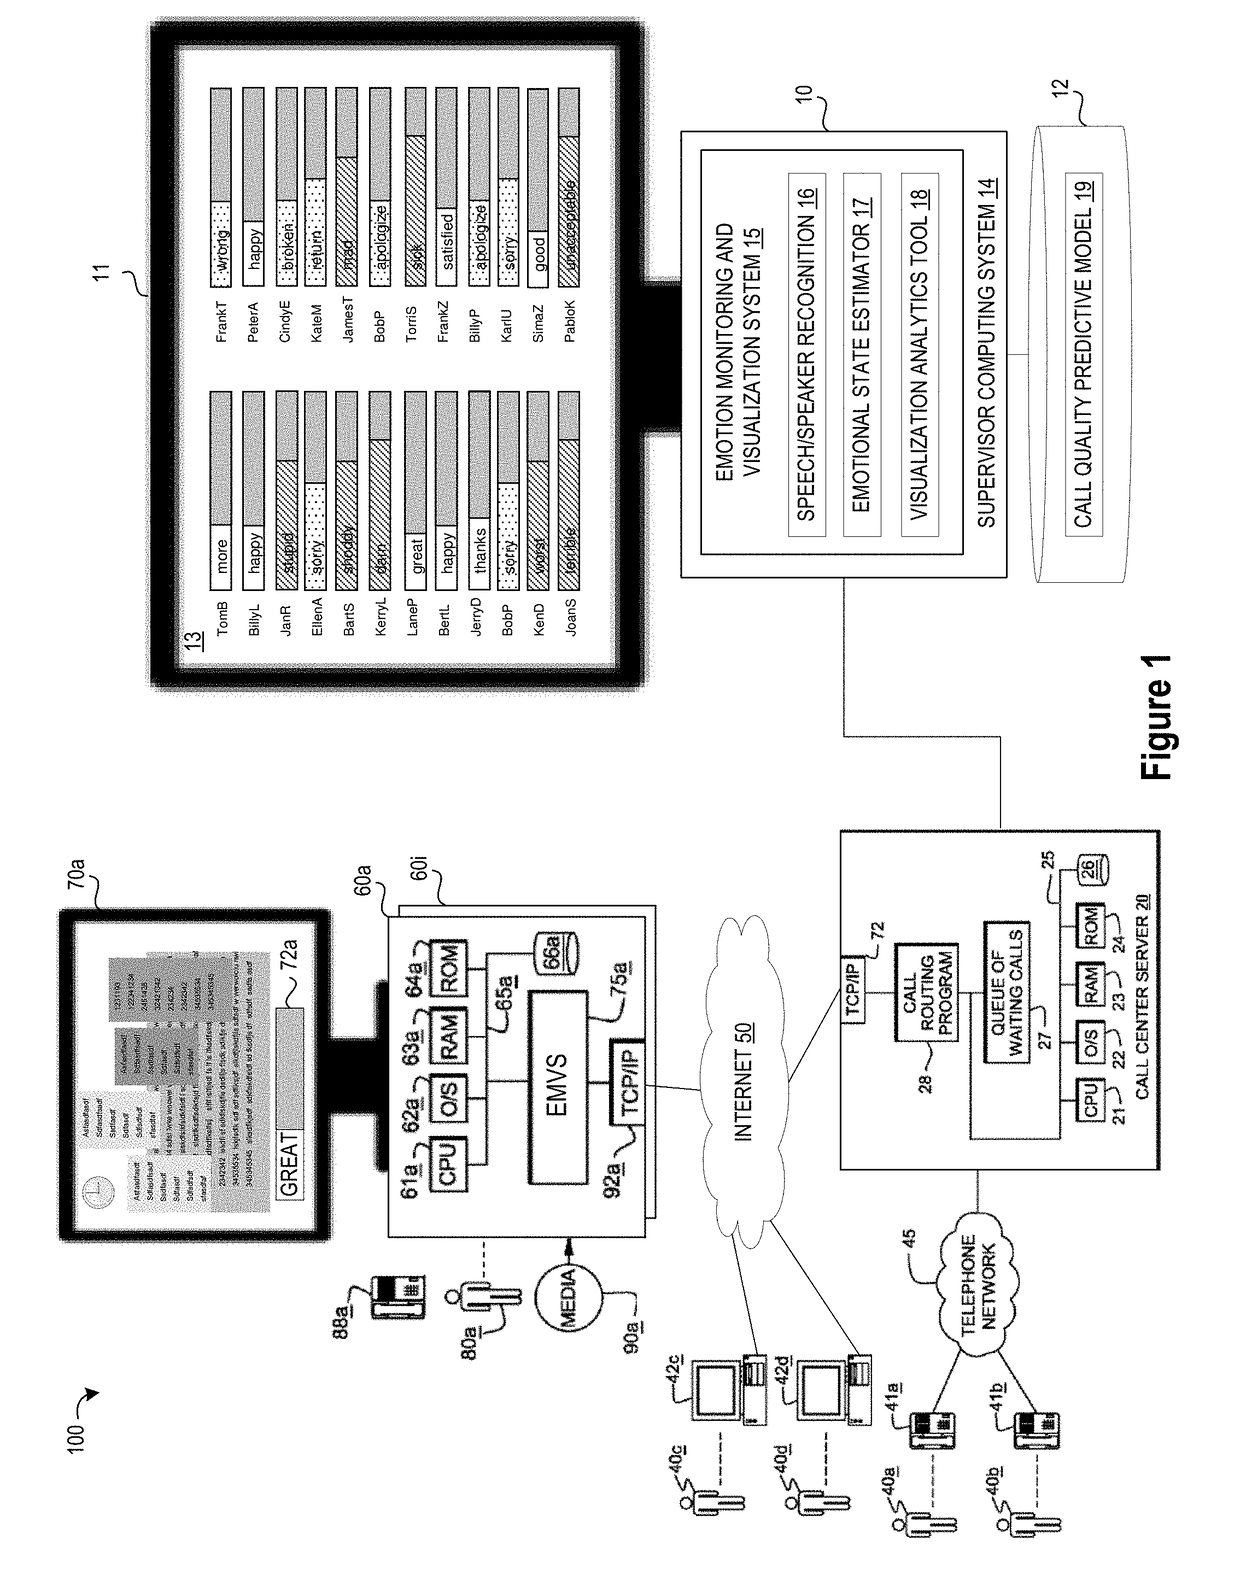 System and Method for Monitoring and Visualizing Emotions in Call Center Dialogs by Call Center Supervisors